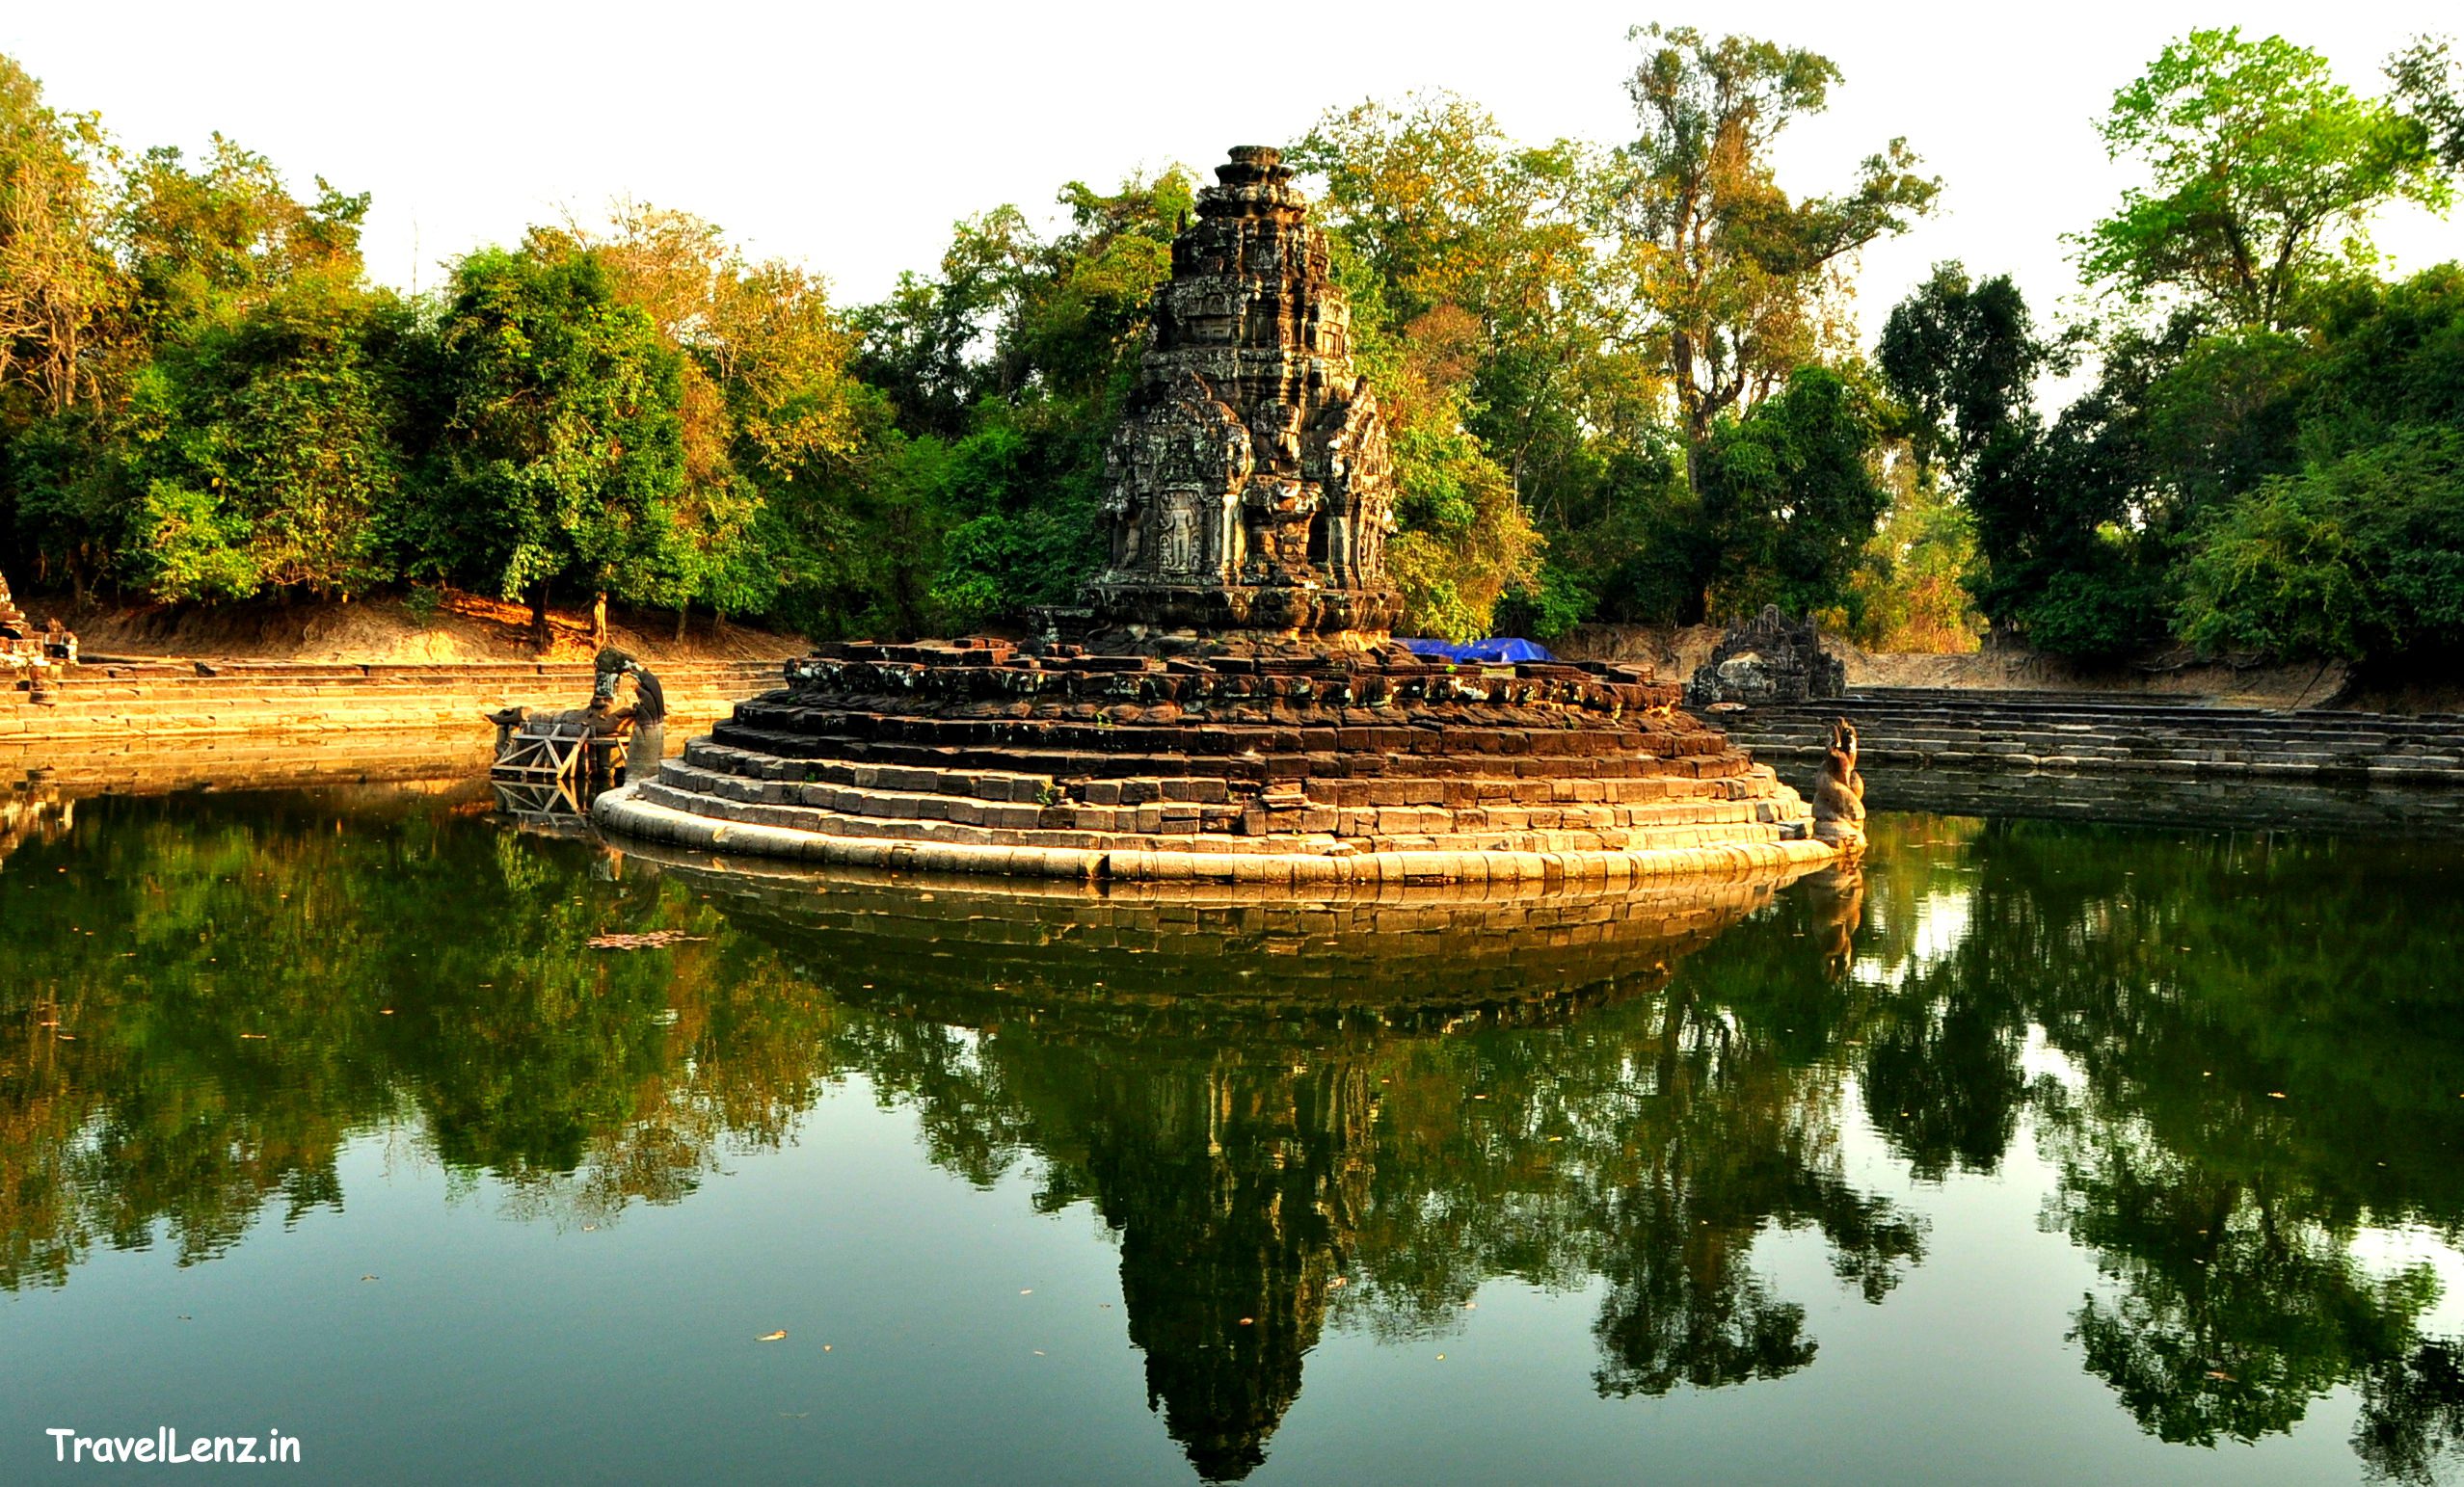 Neak Pean - Balaha (left) and the entwining snakes (right) can be seen